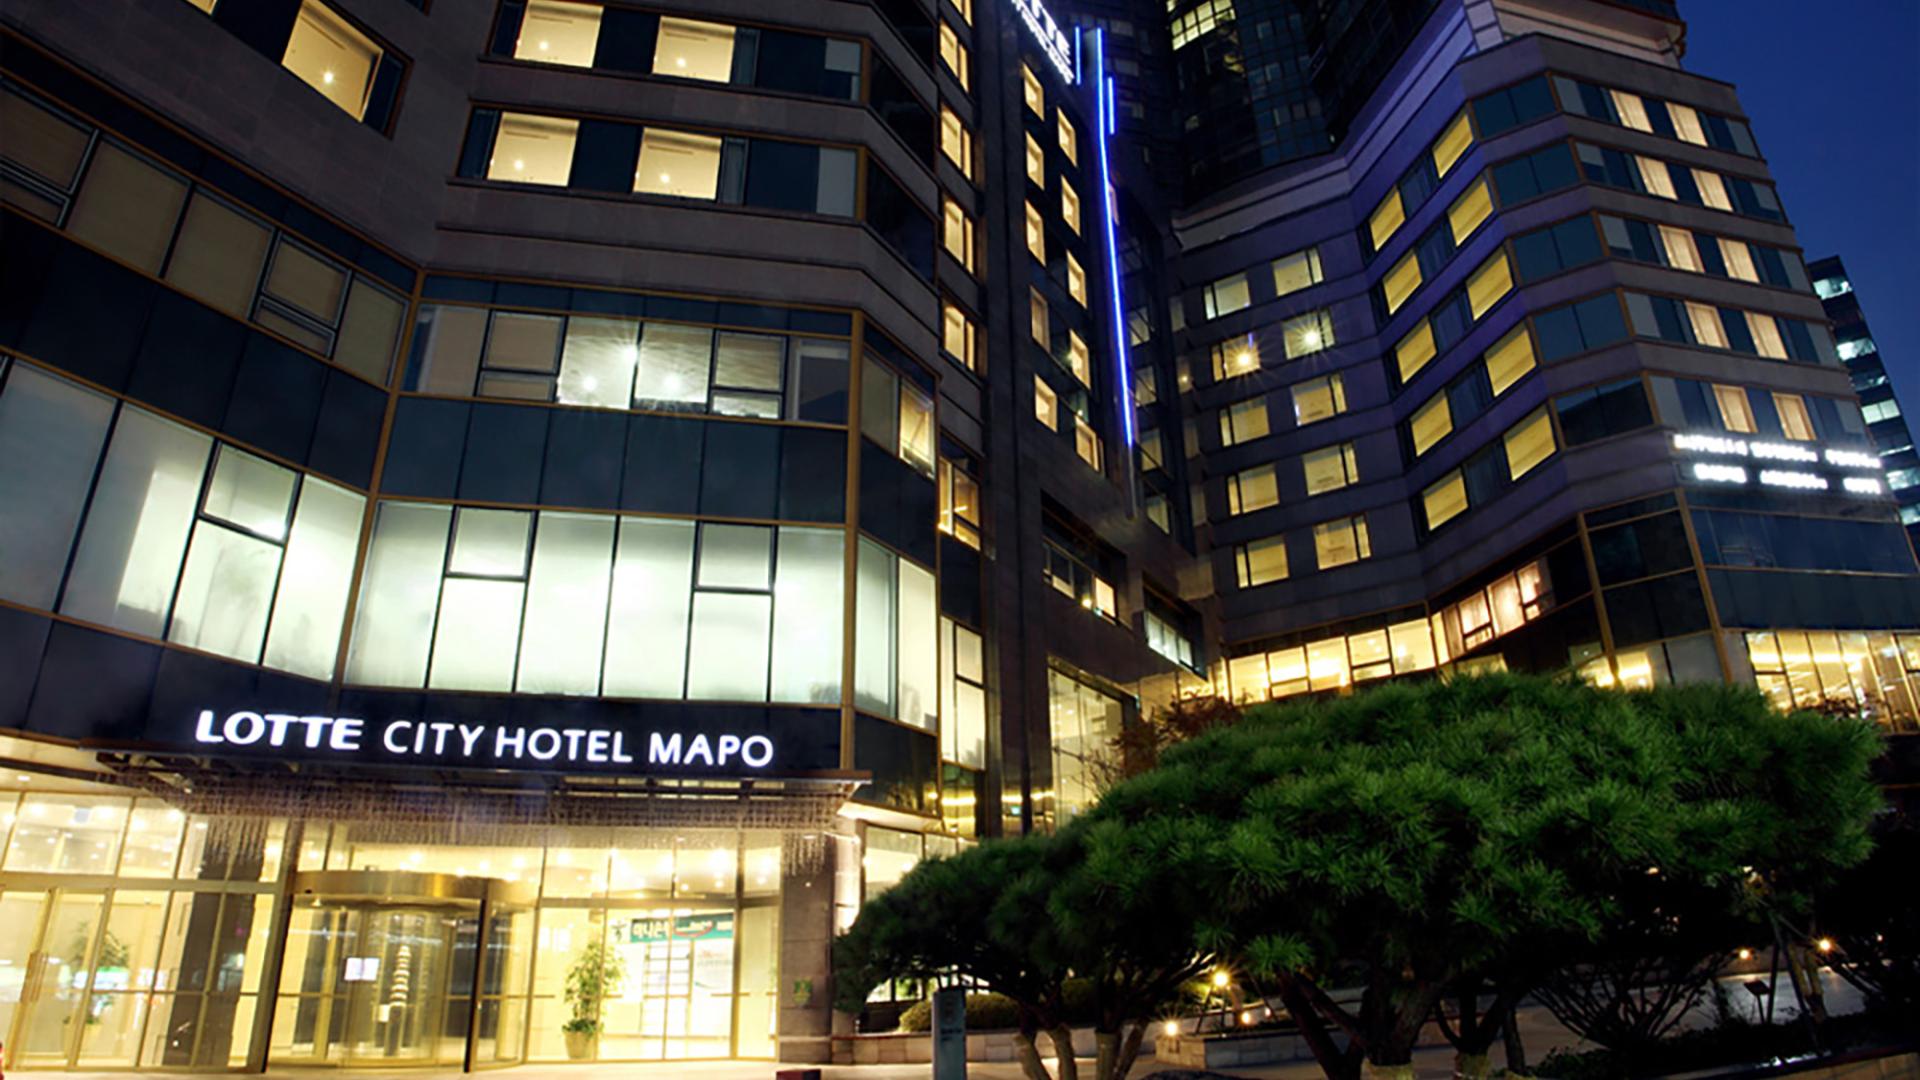 Lotte City Hotel Mapo Hotel Overview